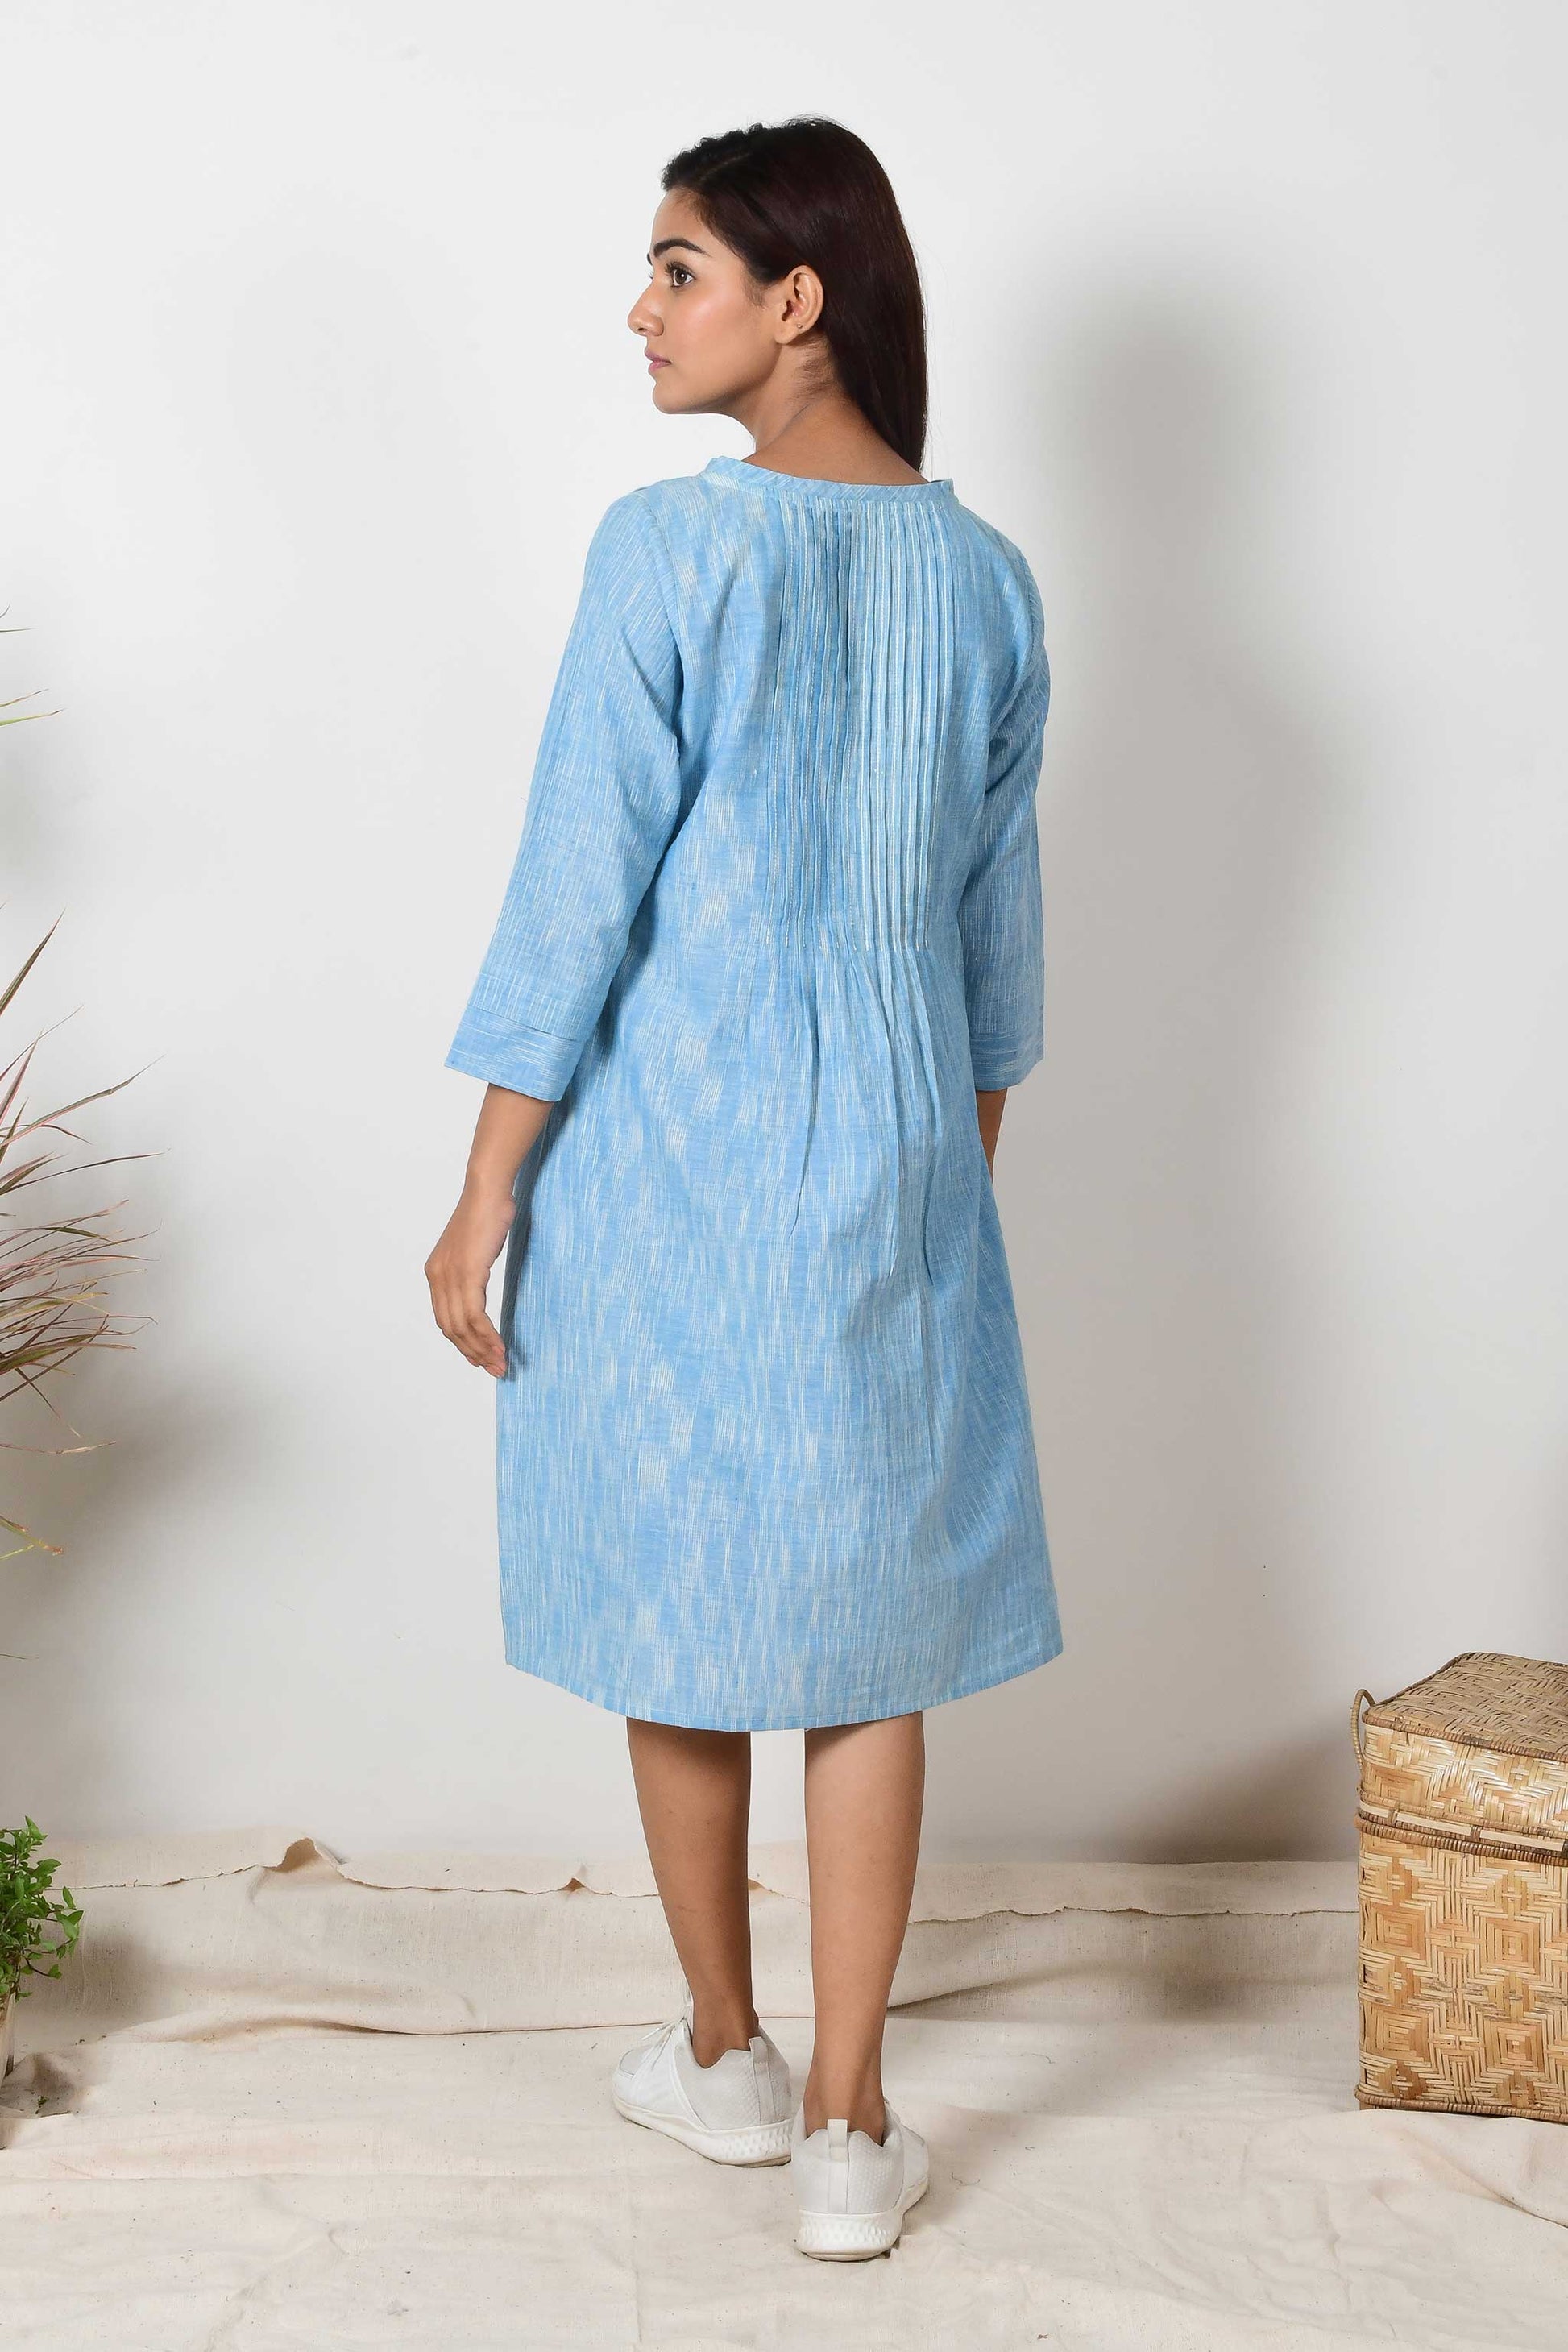 back of a sky blue cotton dress with pleated details worn by an Indian girl. Dress is paired with white sneakers.